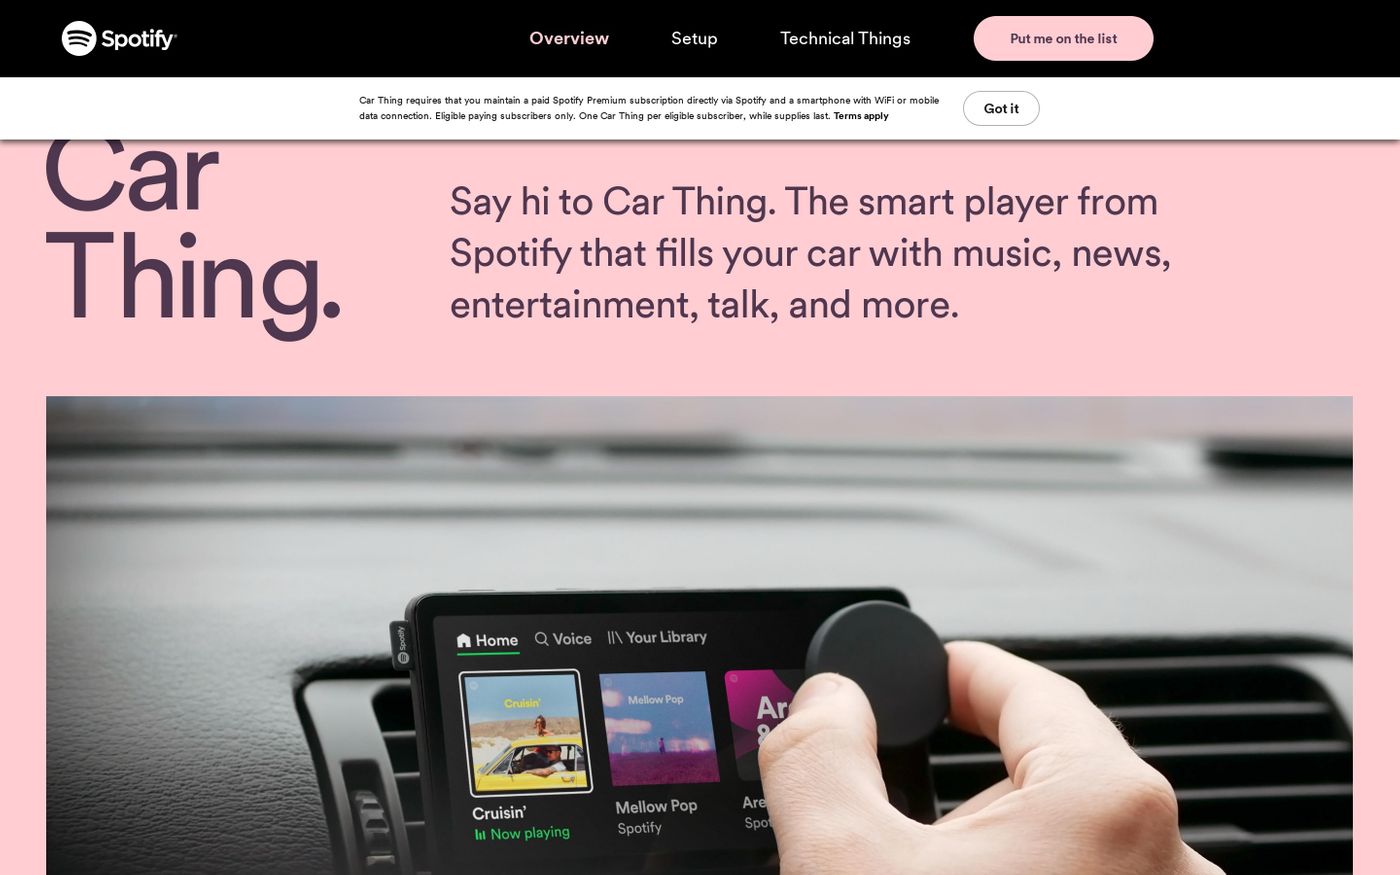 Screenshot of Car Thing from Spotify website